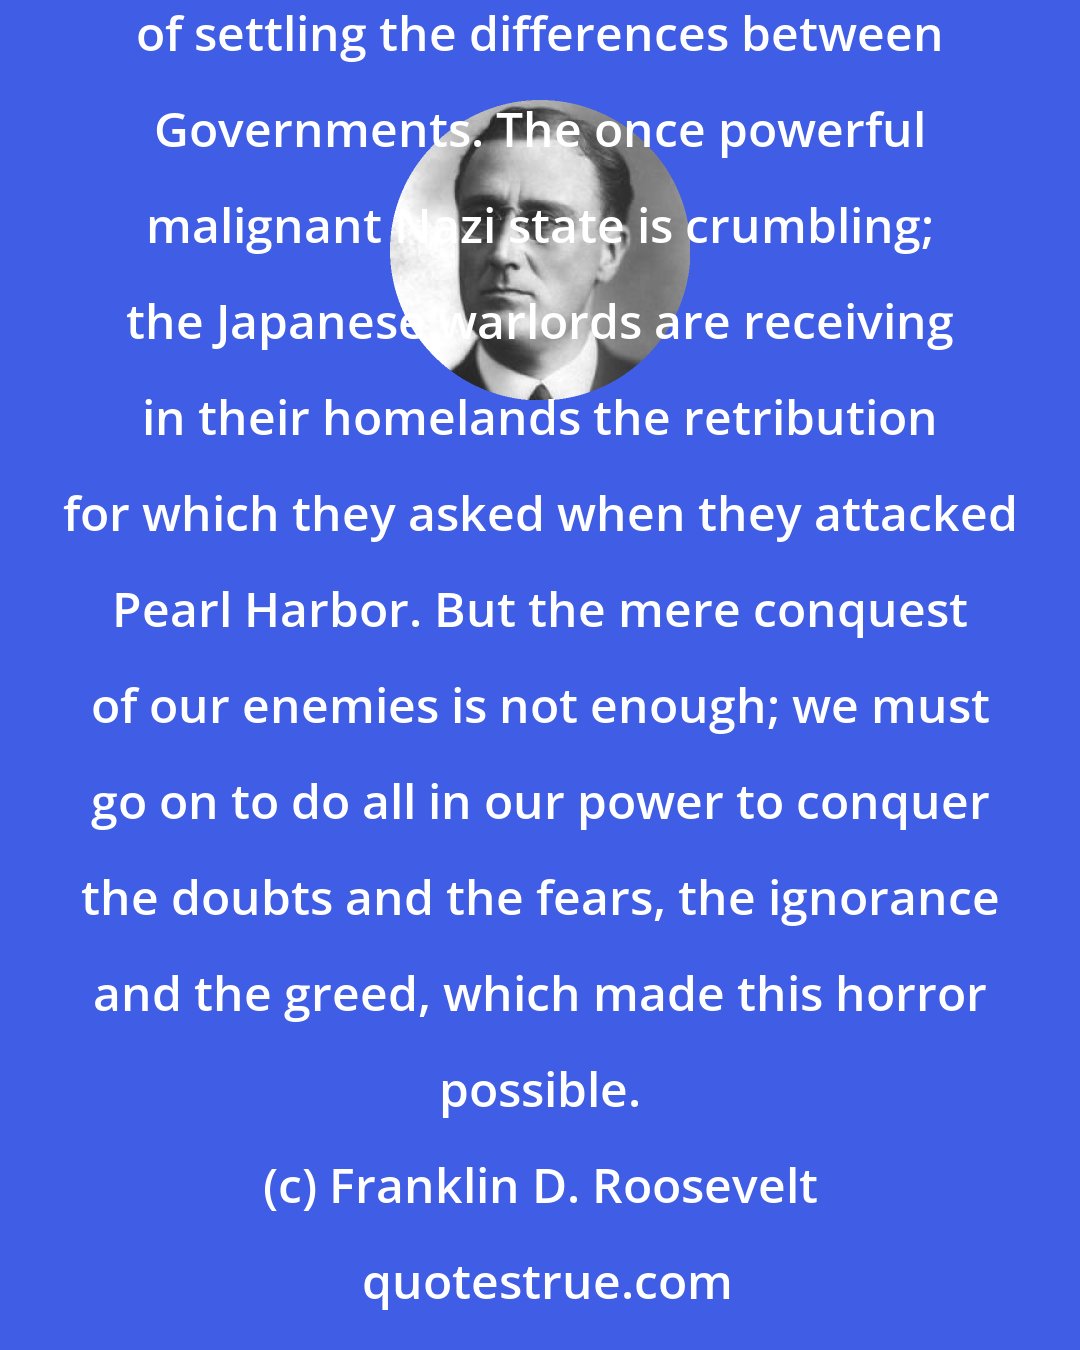 Franklin D. Roosevelt: More than an end to war, we want an end to the beginnings of all wars. Yes, an end to this brutal, inhuman and thoroughly impractical method of settling the differences between Governments. The once powerful malignant Nazi state is crumbling; the Japanese warlords are receiving in their homelands the retribution for which they asked when they attacked Pearl Harbor. But the mere conquest of our enemies is not enough; we must go on to do all in our power to conquer the doubts and the fears, the ignorance and the greed, which made this horror possible.